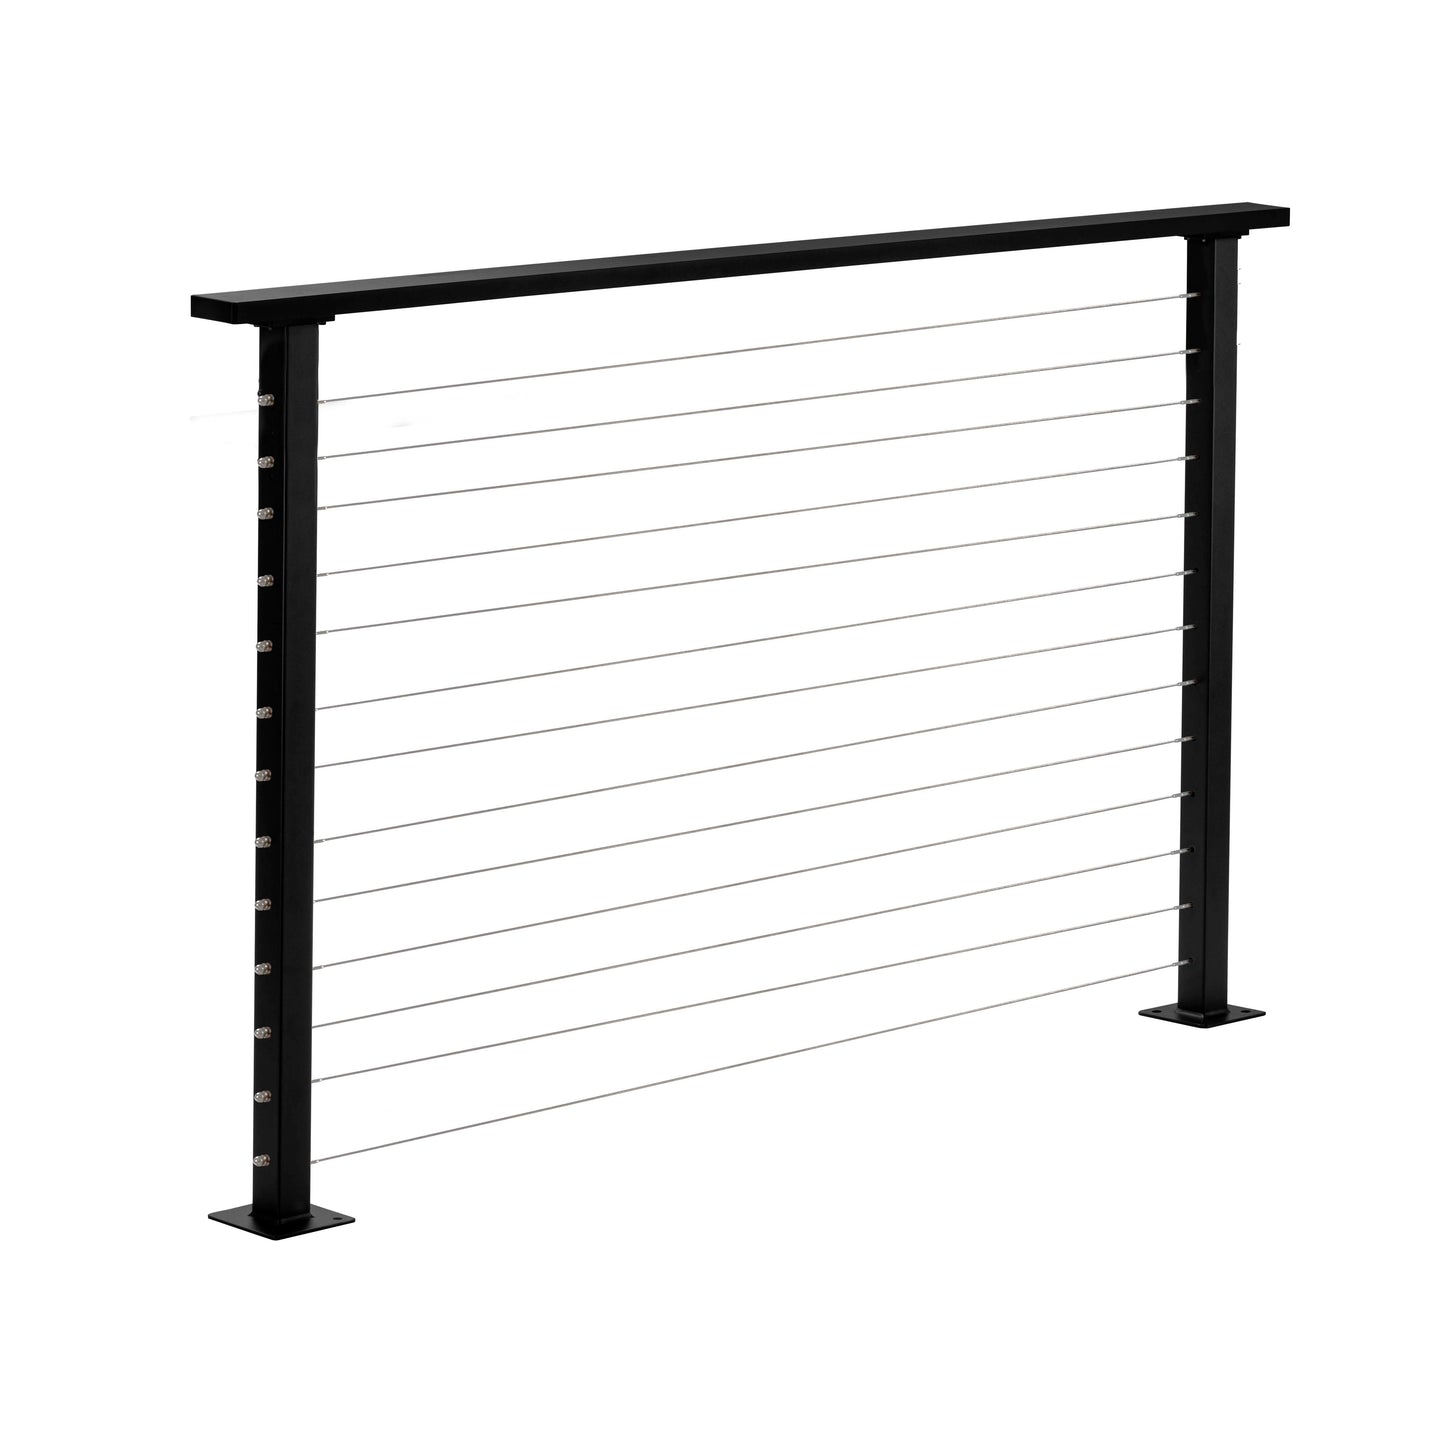 4 ft. Deck Cable Railing, 42 in. Base Mount, Black , Stainless